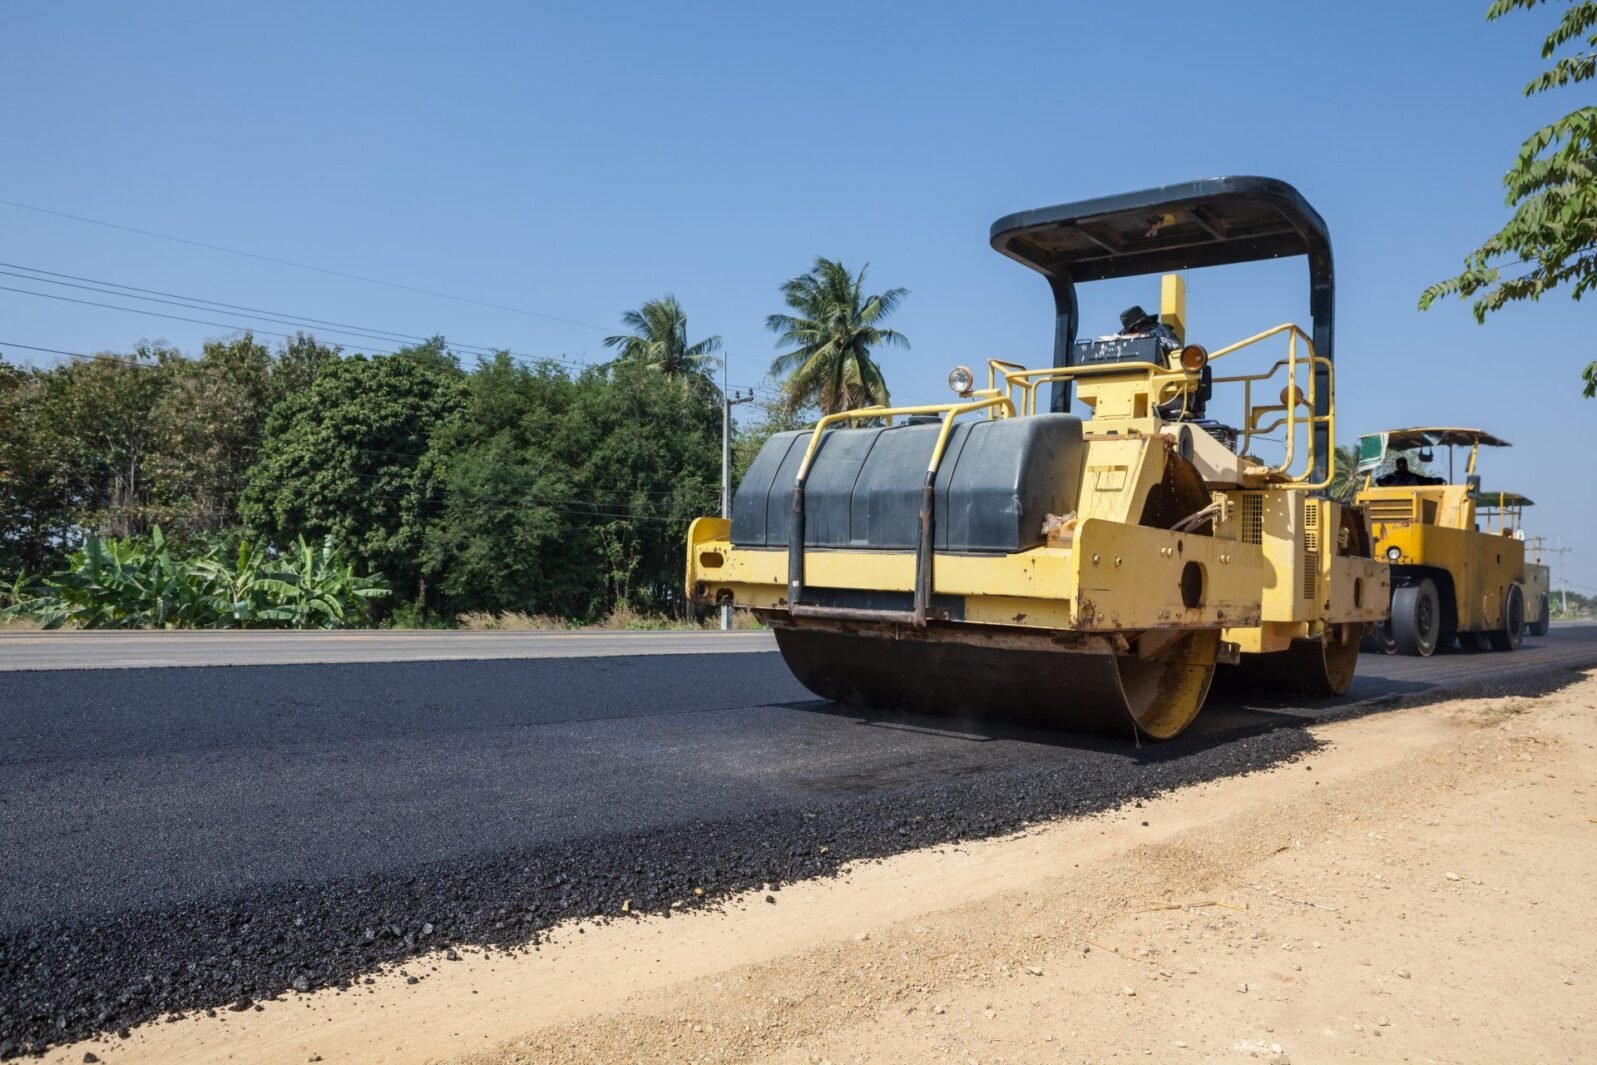 After removing the debris, the asphalt contractors installed a new road surface.